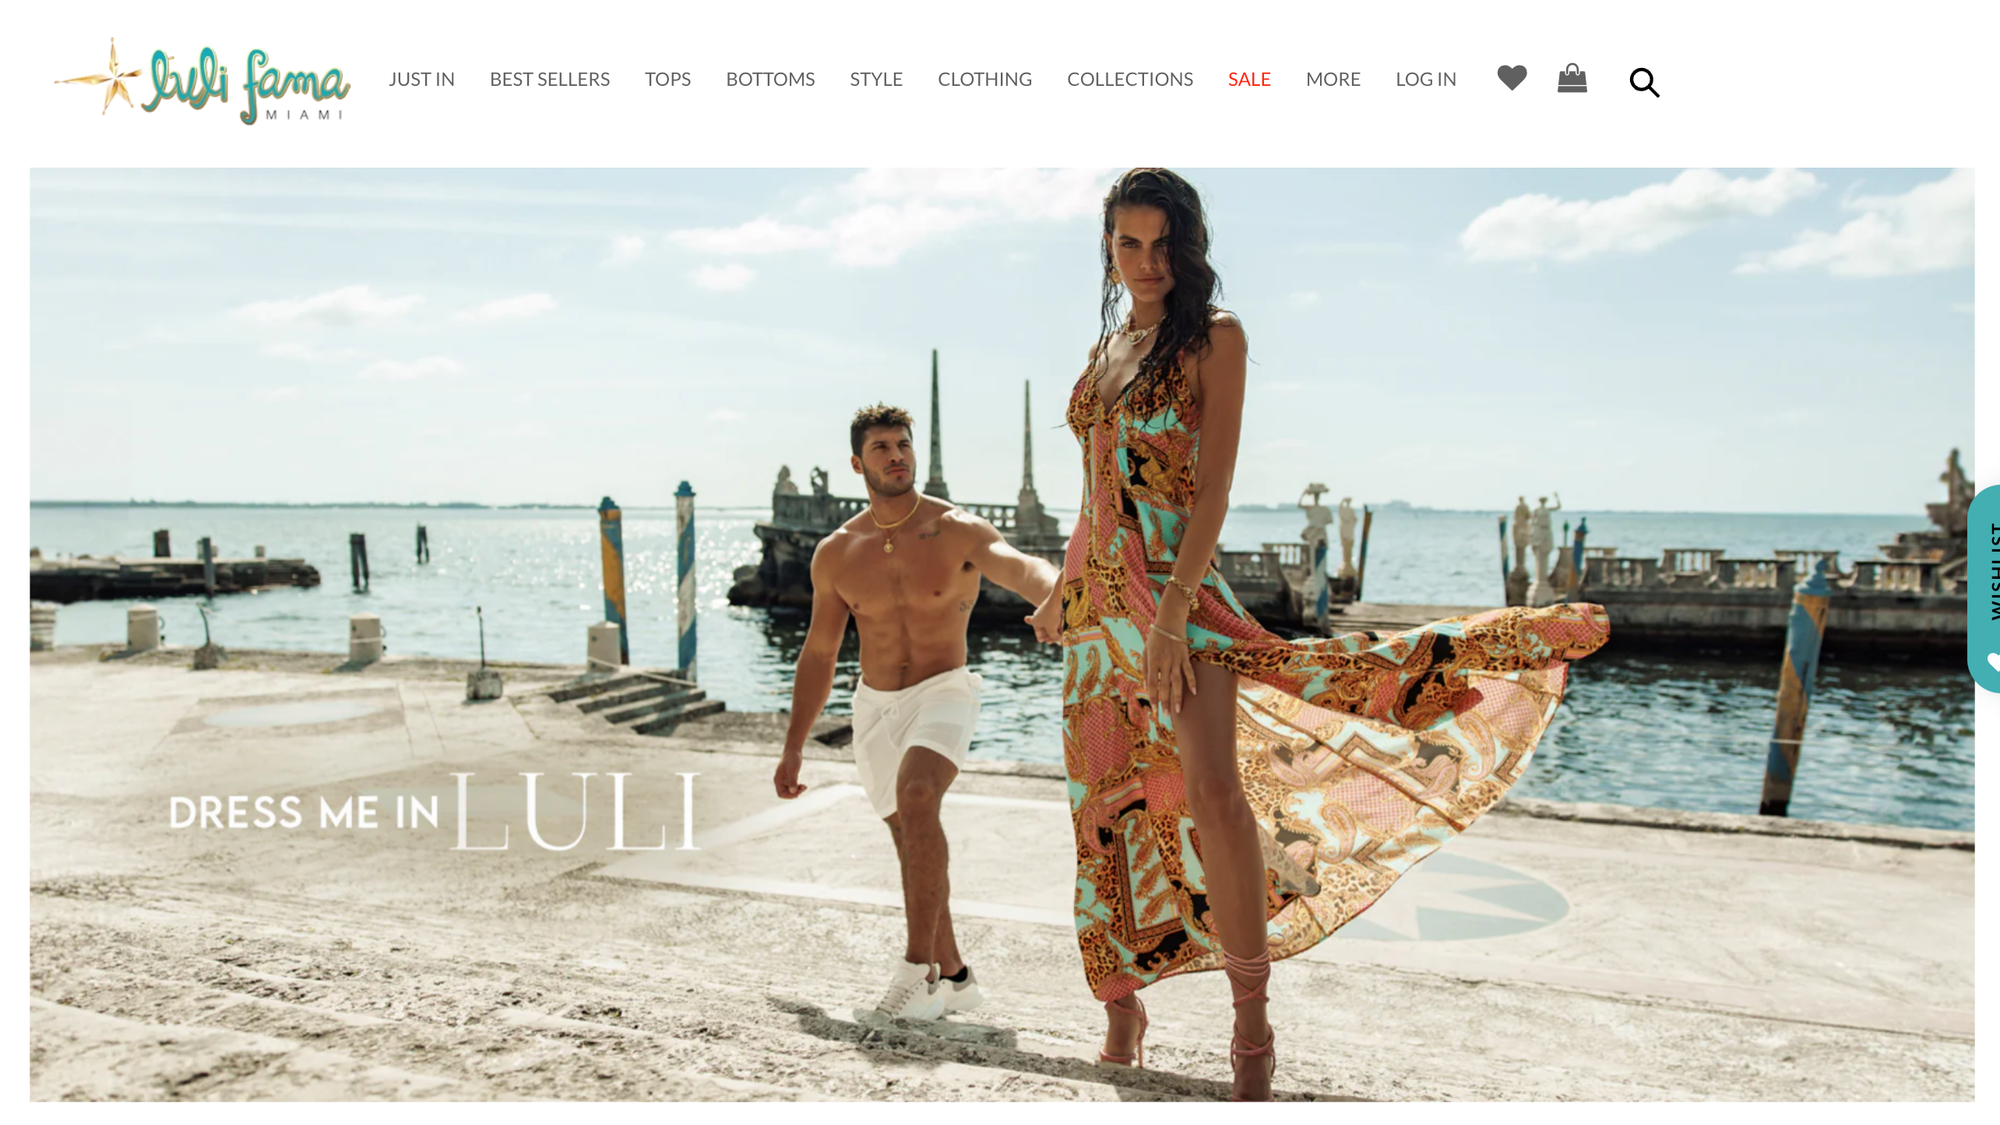 How Polls Drove Over $200k in New Revenue for a Swimwear Brand Before Summer